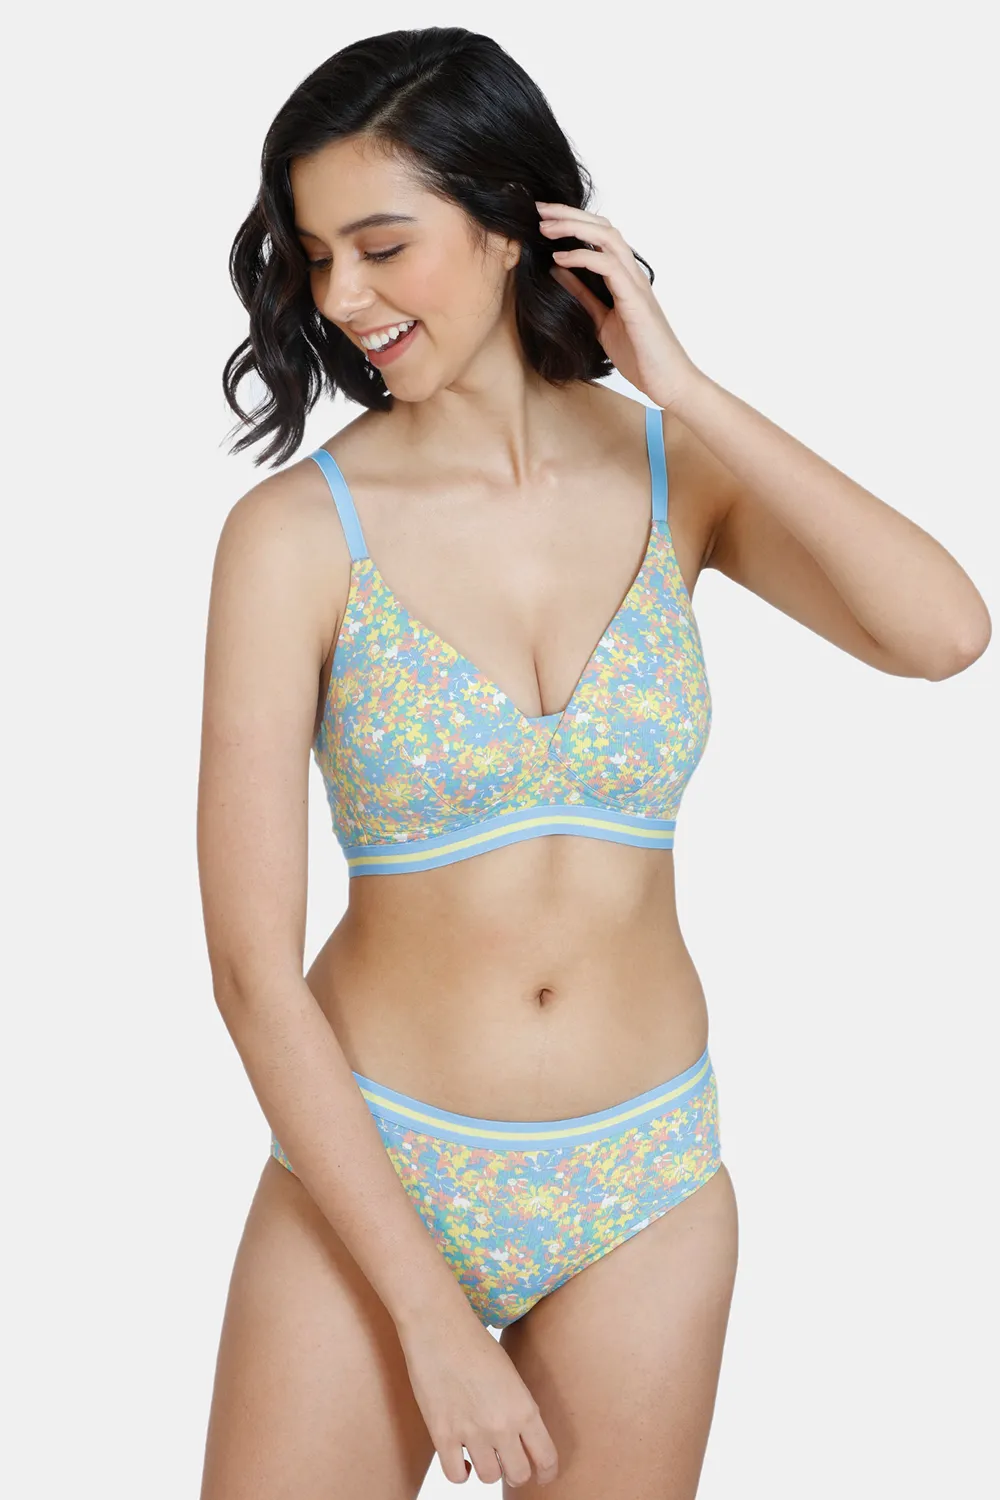 https://cdn.zivame.com/ik-seo/media/catalog/product/1/_/1_33_23/zivame-vivacious-padded-non-wired-3-4th-coverage-t-shirt-bra-with-hipster-panty-blue-print-1.jpg